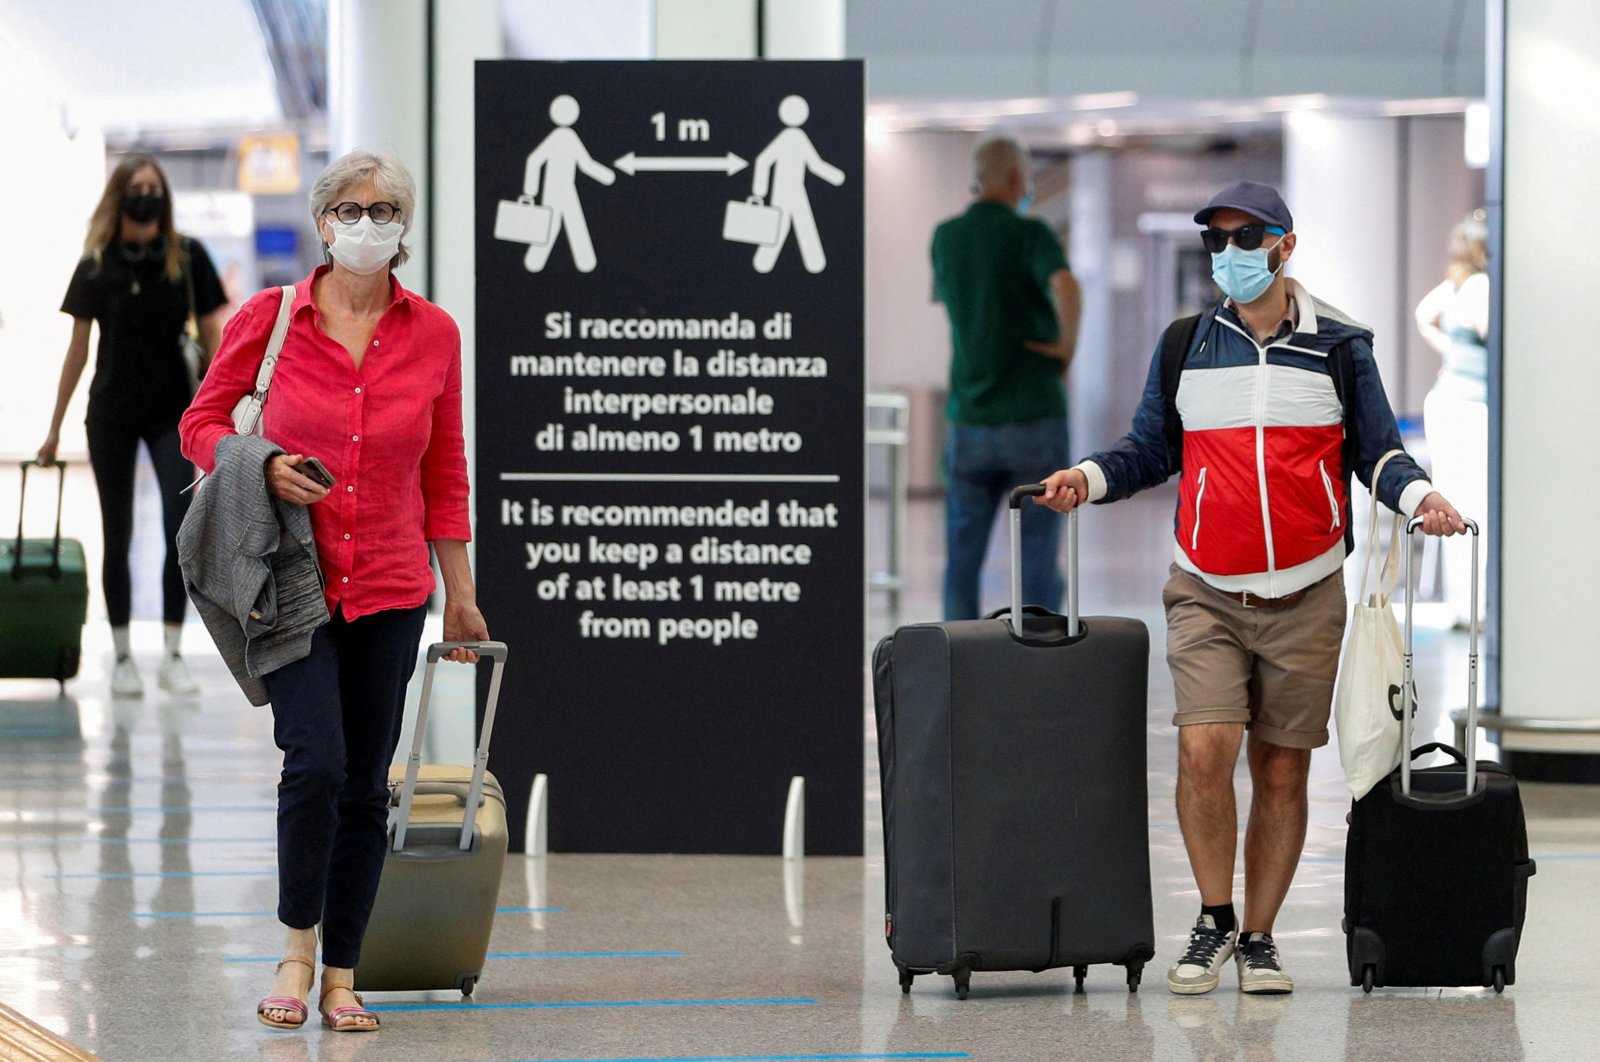 Passengers wearing protective face masks walk at Fiumicino Airport, in Rome, Italy, June 30, 2020. (REUTERS Photo)